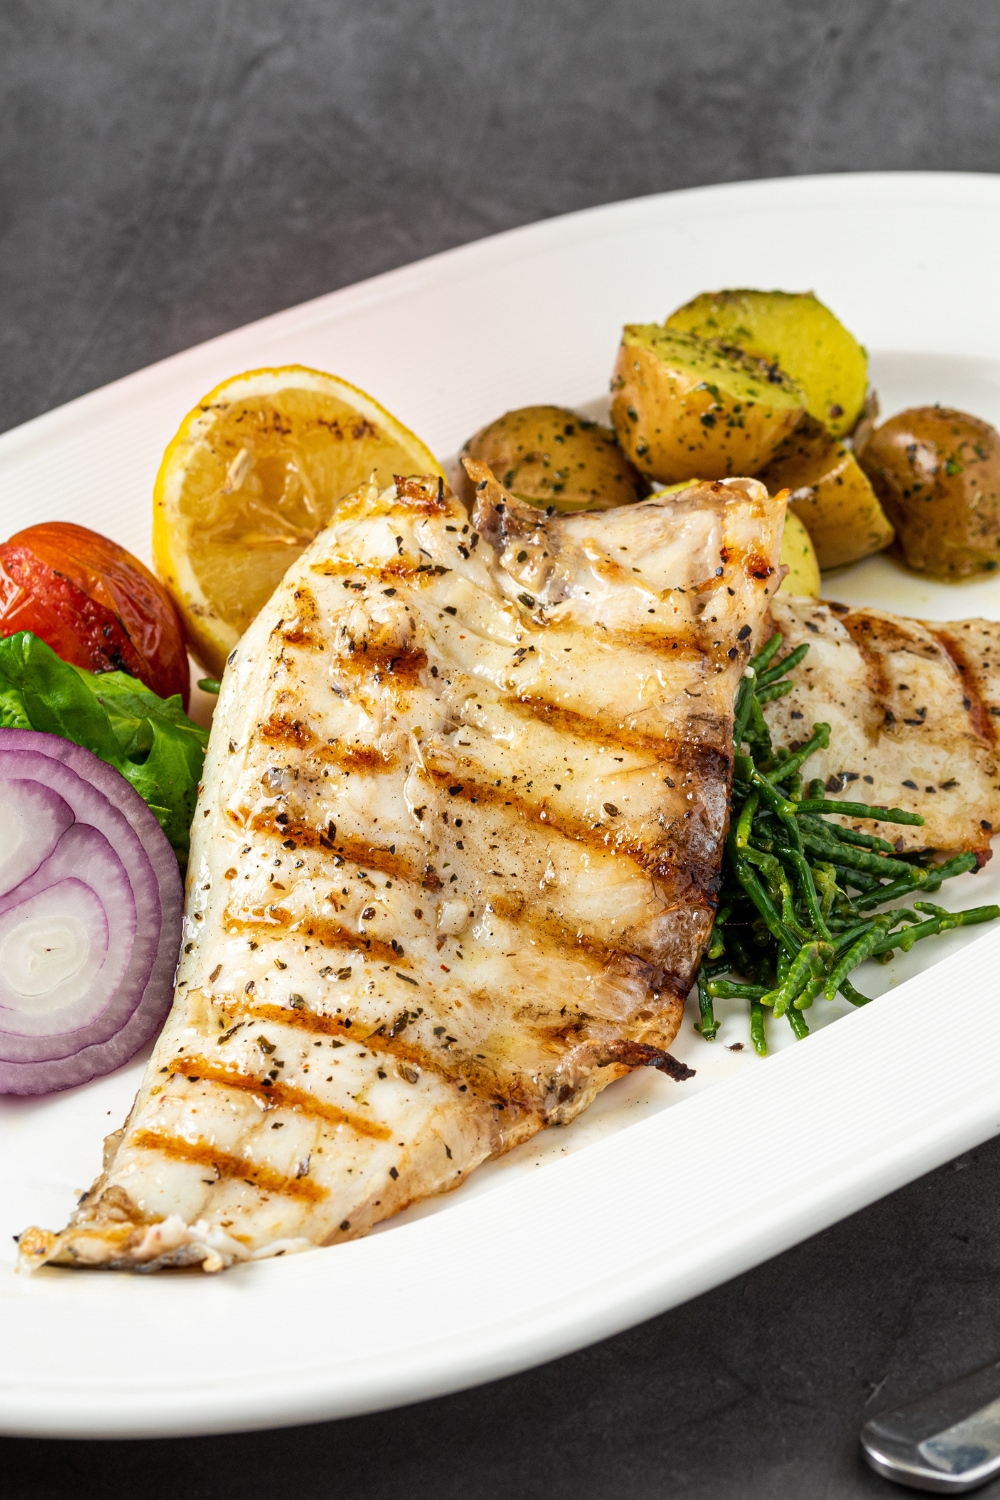 Grilled Sea Bass Fillet with Potatoes, Sliced lemon, Tomatoes, Red Onions and Greens